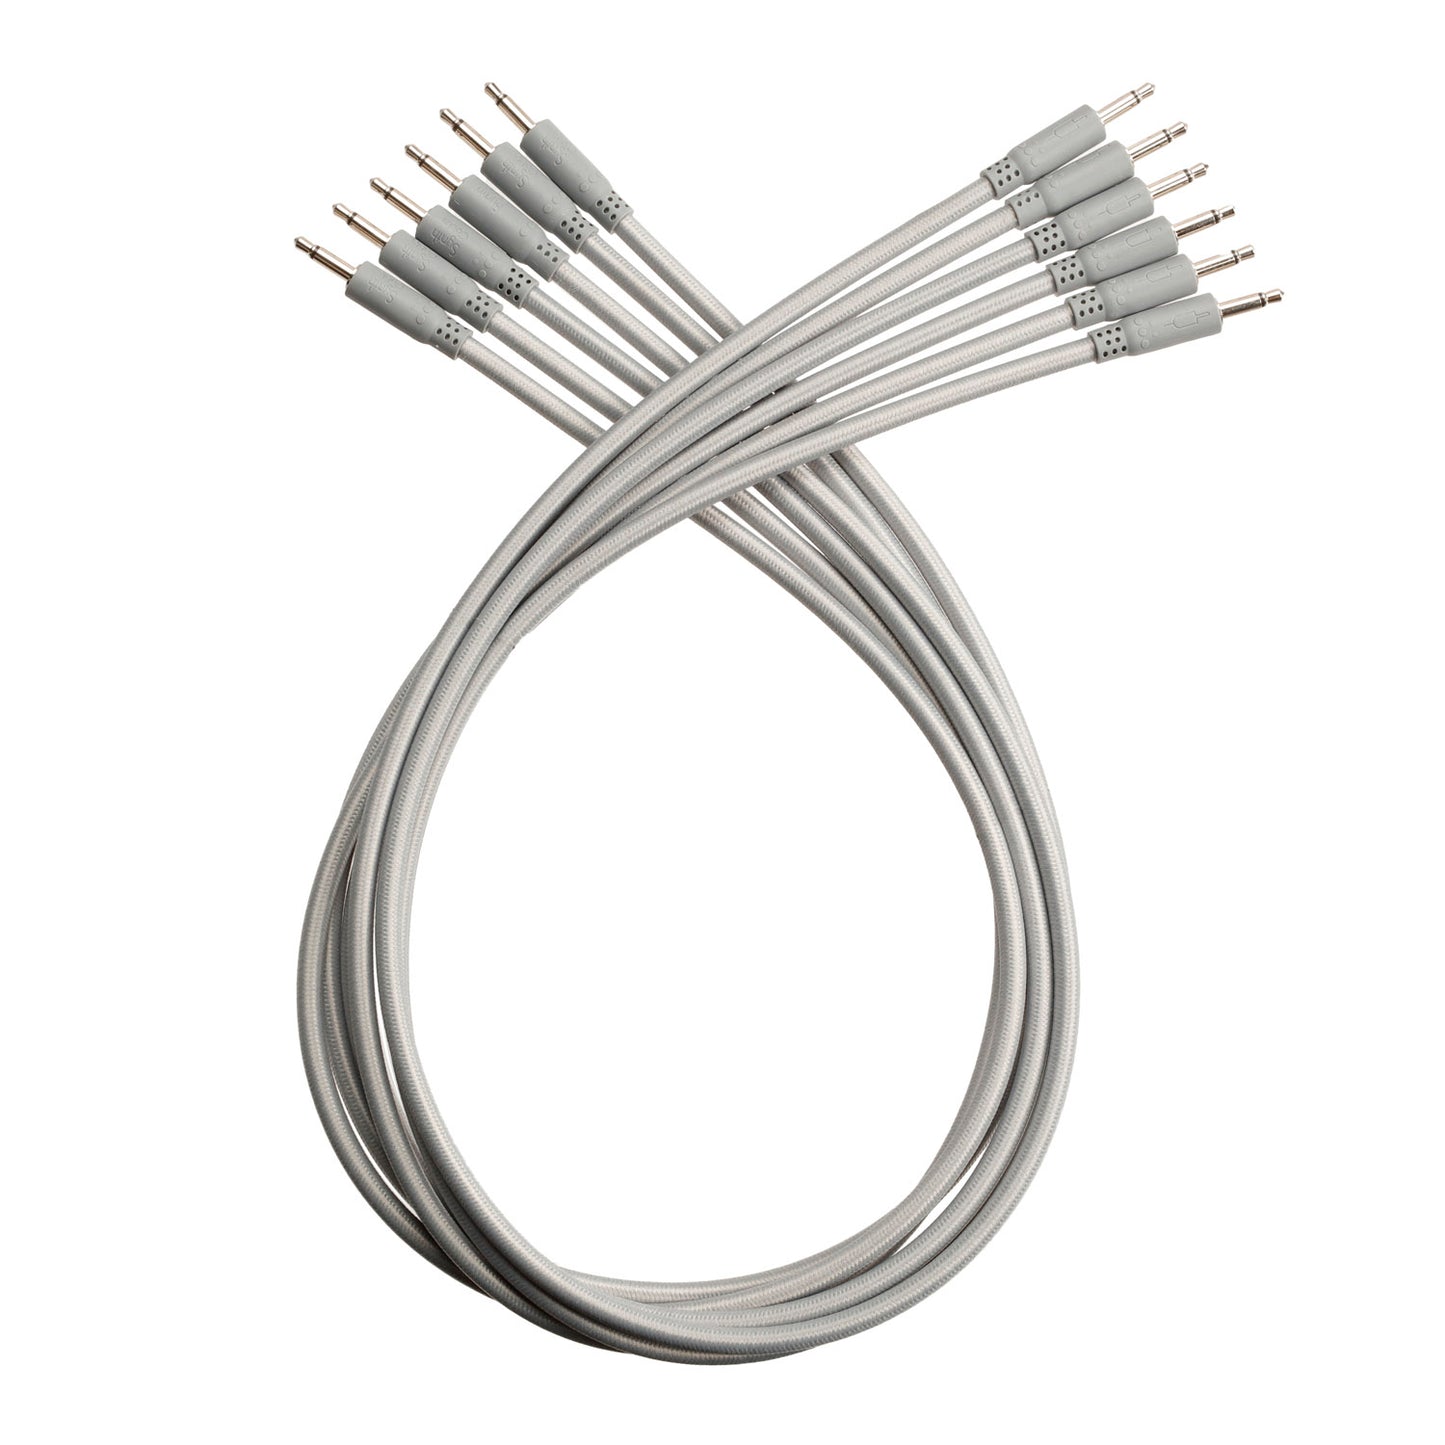 Braided Mono Patch Cables - Pack of Six